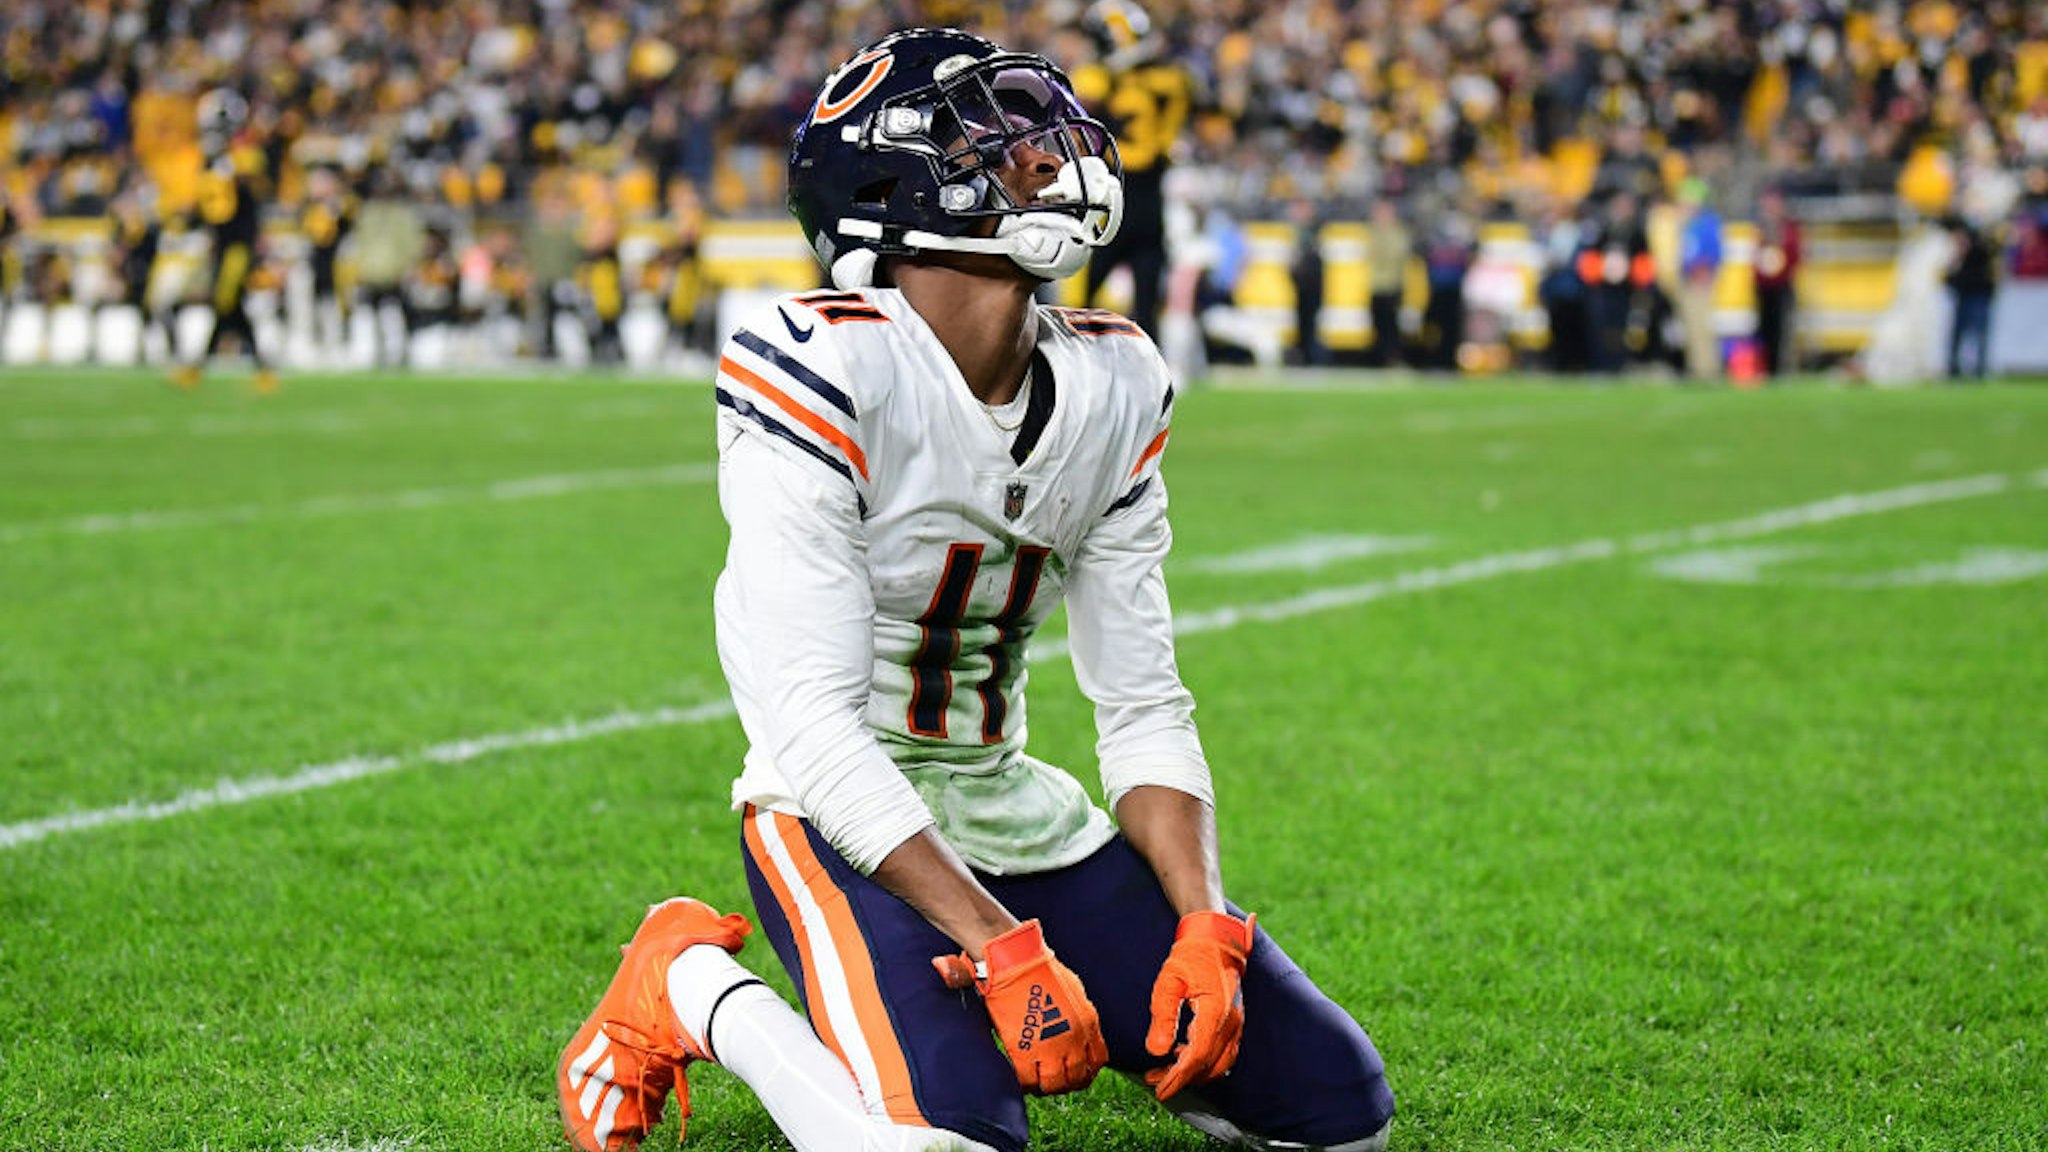 PITTSBURGH, PENNSYLVANIA - NOVEMBER 08: Darnell Mooney #11 of the Chicago Bears reacts after an incomplete pass against the Pittsburgh Steelers during the second half at Heinz Field on November 8, 2021 in Pittsburgh, Pennsylvania. (Photo by Emilee Chinn/Getty Images)